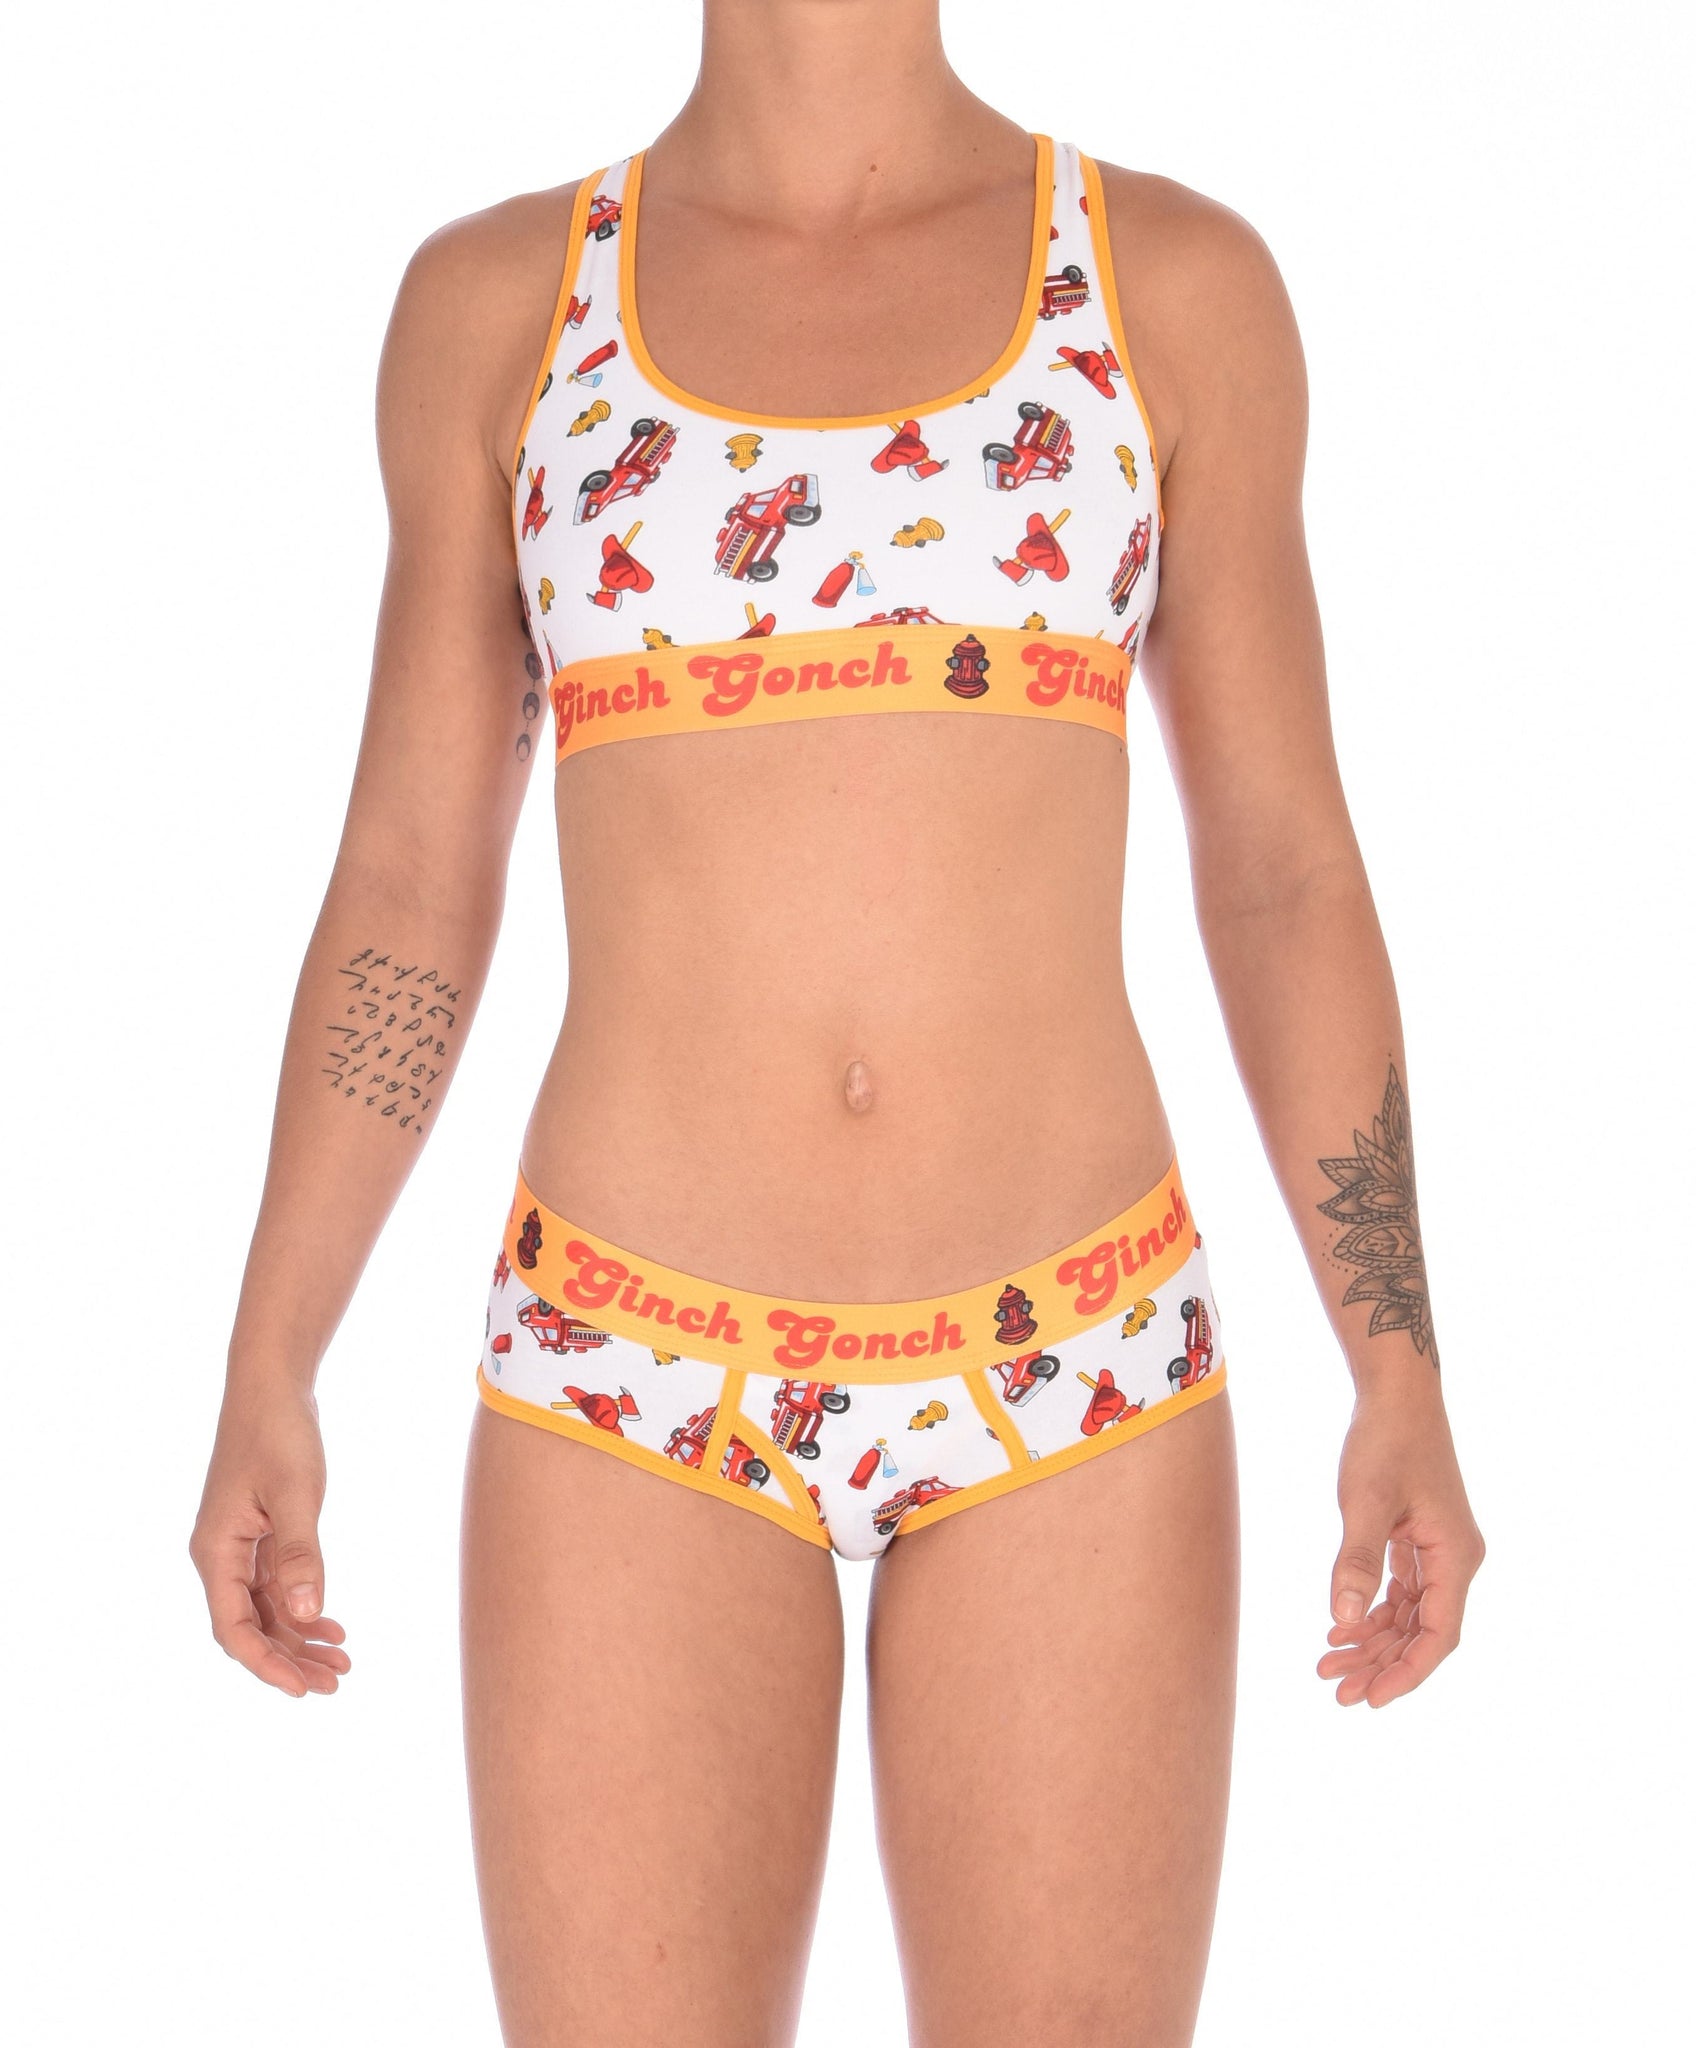 Ginch Gonch GG Fire Fighters boy cut Brief womens y front underwear white fabric with fire engines hats and hydrants, yellow trim and yellow printed waistband front shown with matching sports bra